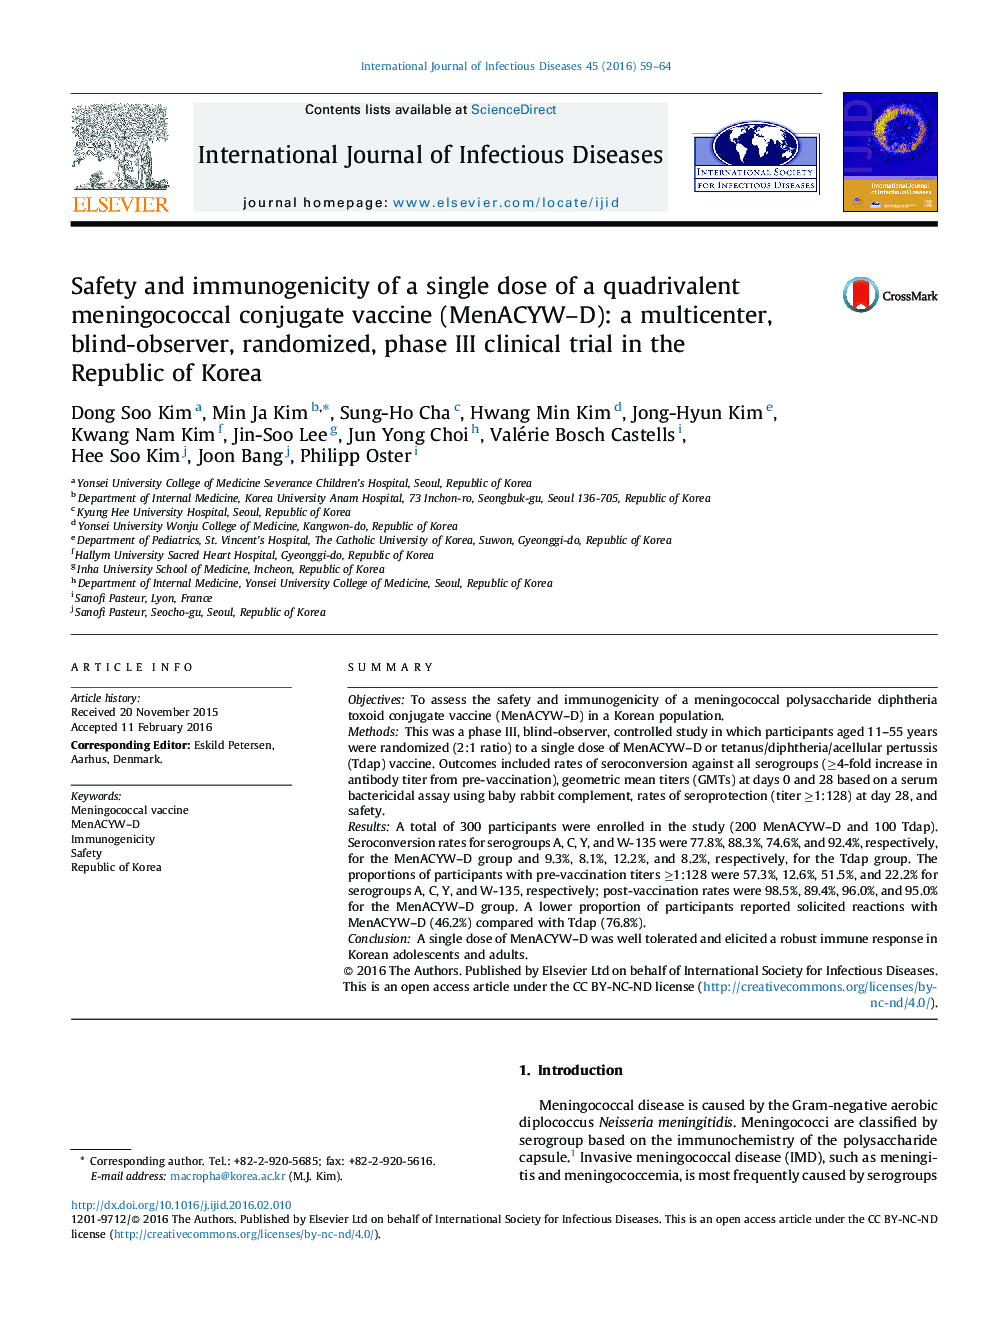 Safety and immunogenicity of a single dose of a quadrivalent meningococcal conjugate vaccine (MenACYW–D): a multicenter, blind-observer, randomized, phase III clinical trial in the Republic of Korea